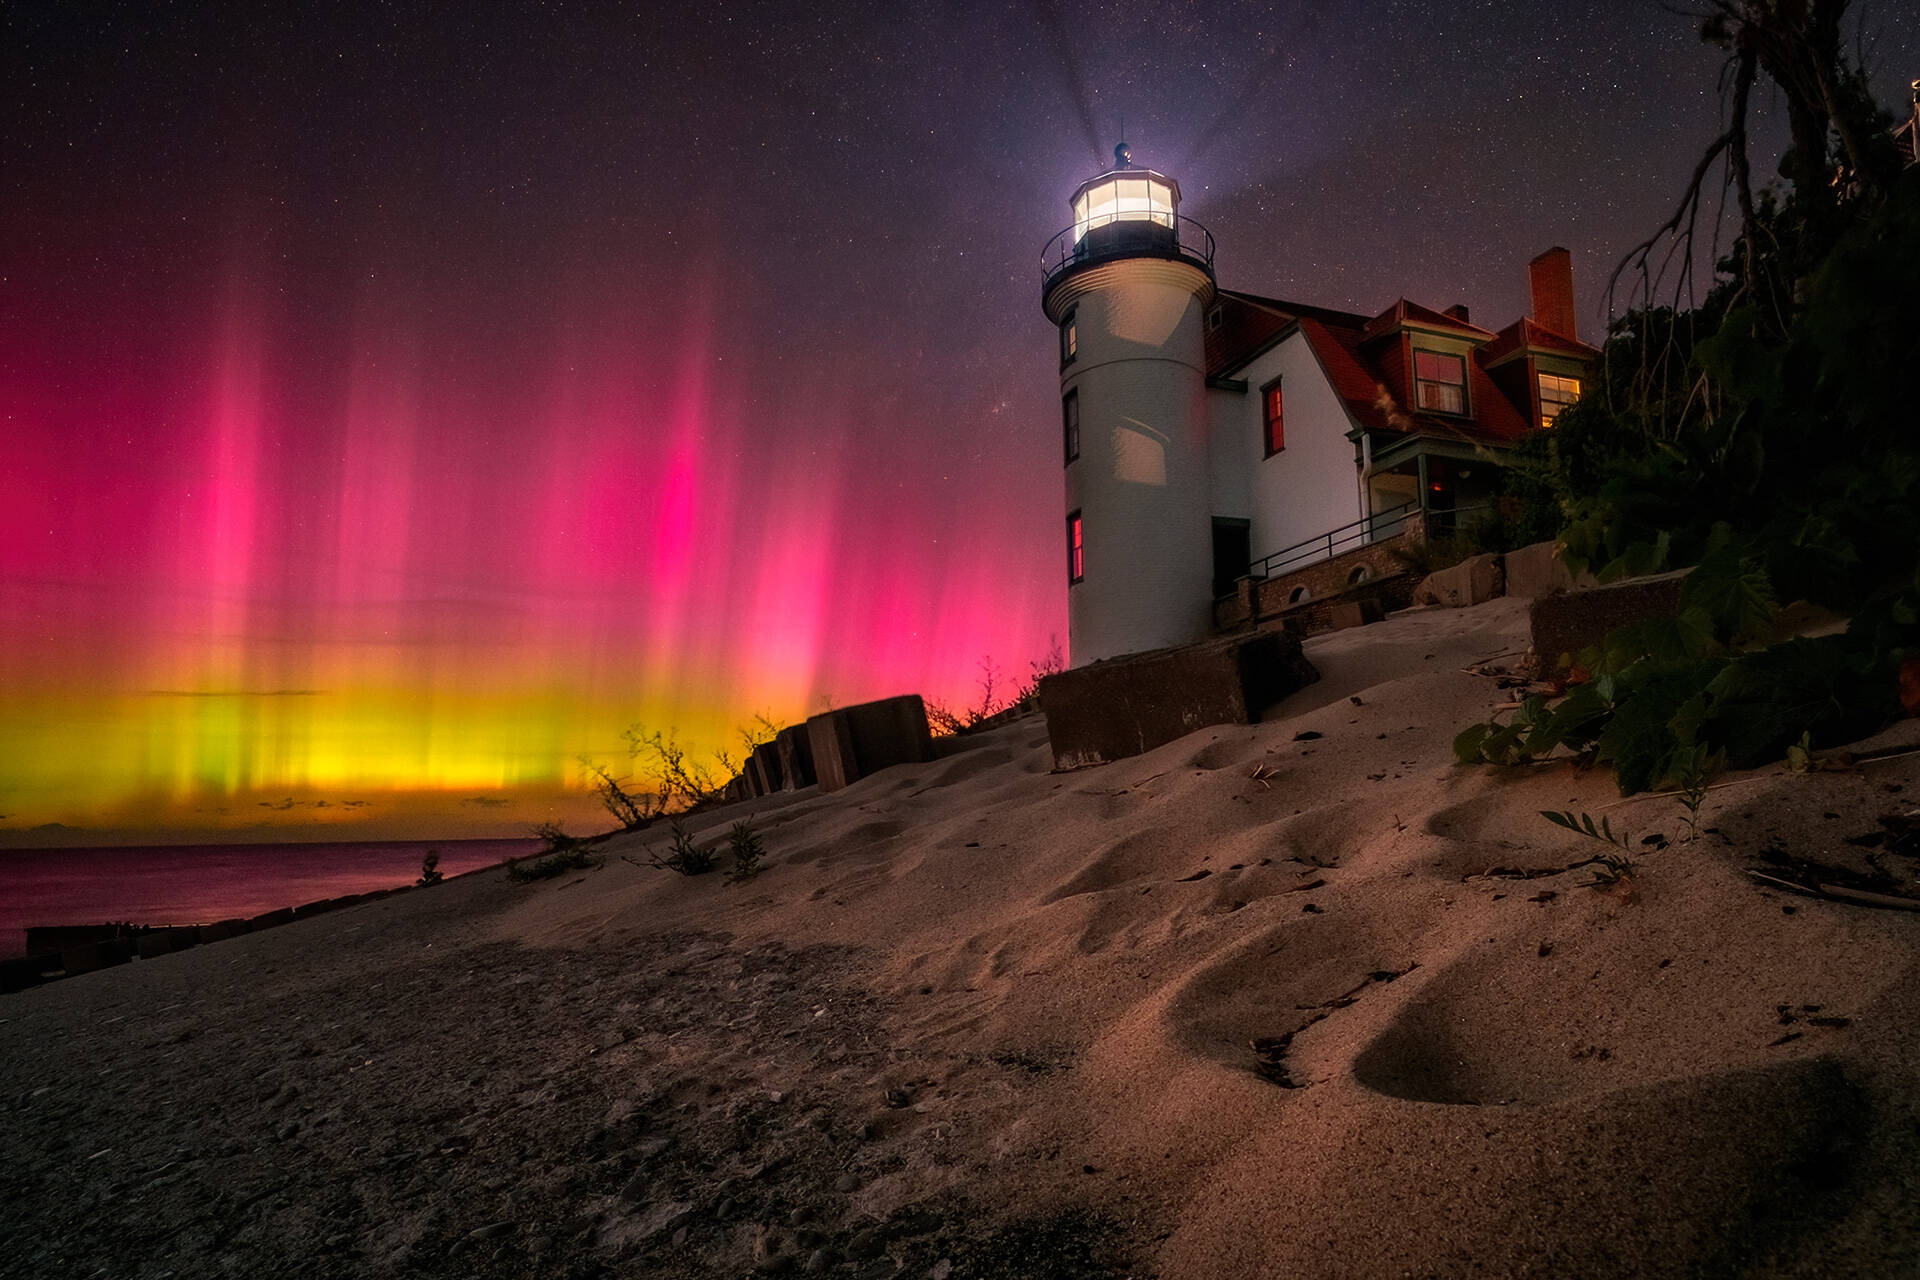 Bright red Aurora covering the night sky with a lighthouse in the forground